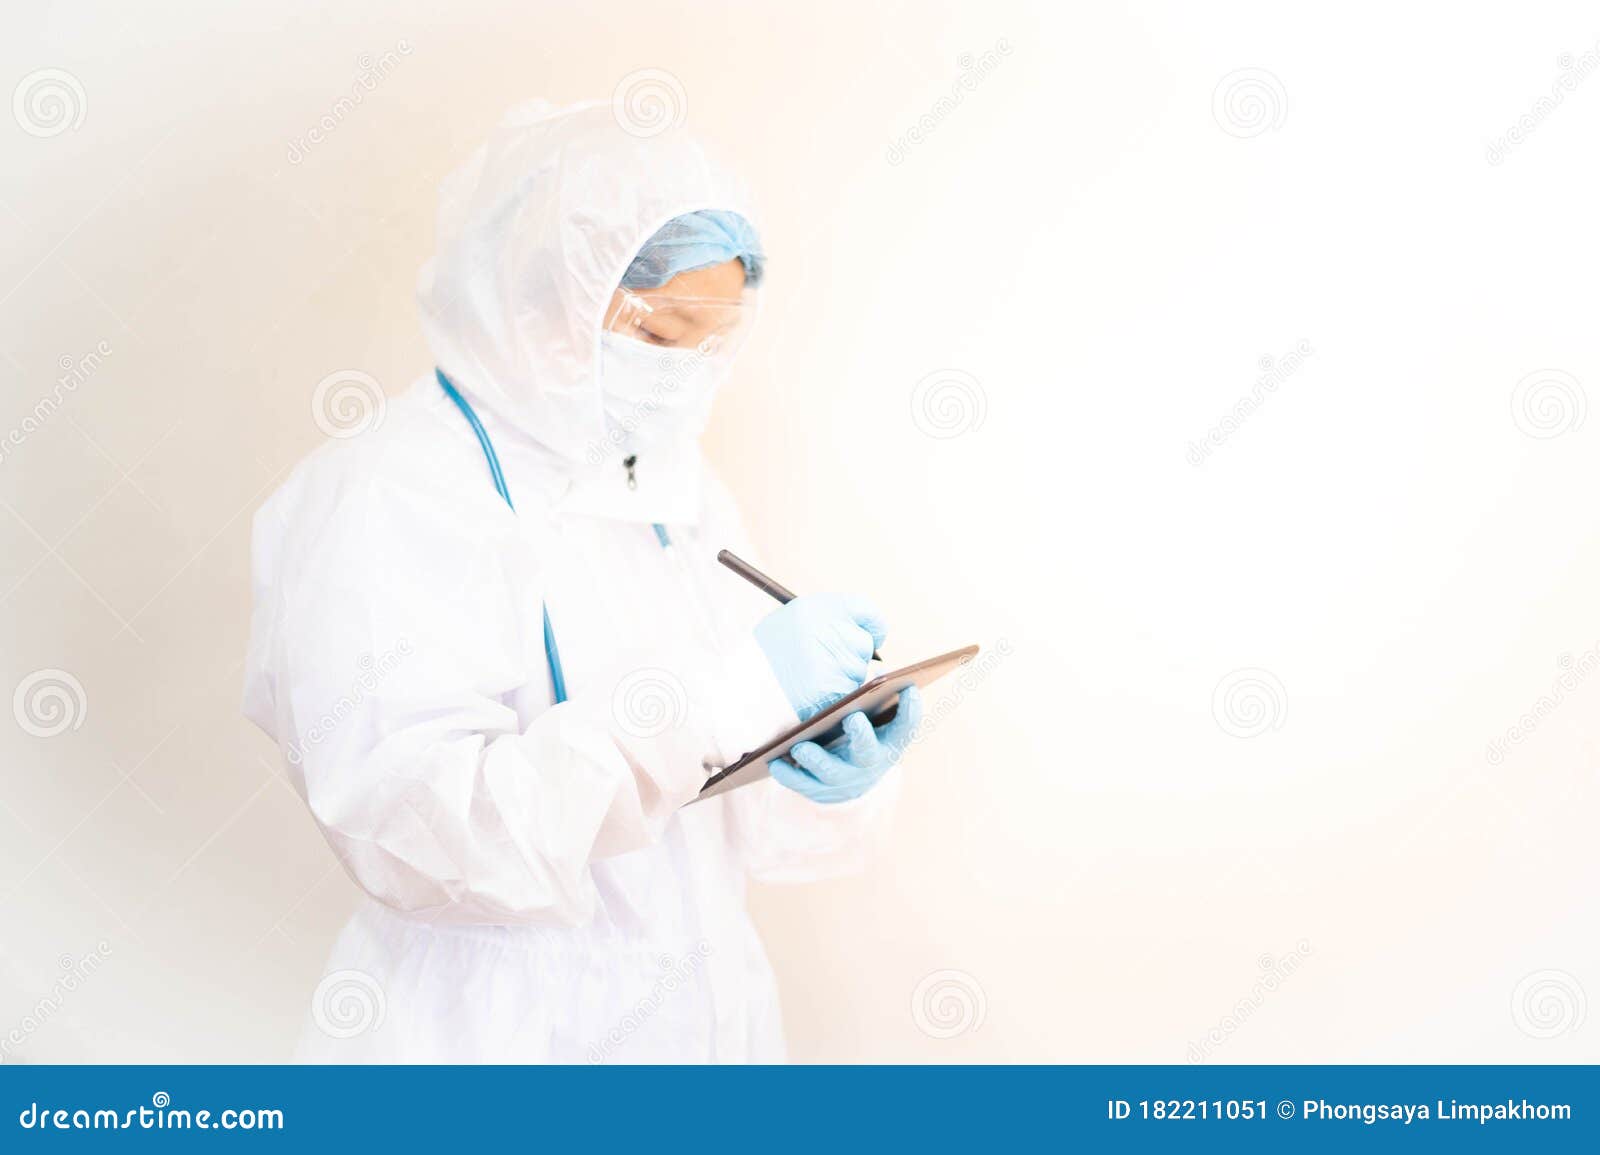 Doctor is Wearing PPE Suit and Looking for Corona/covid-19 Virus ...